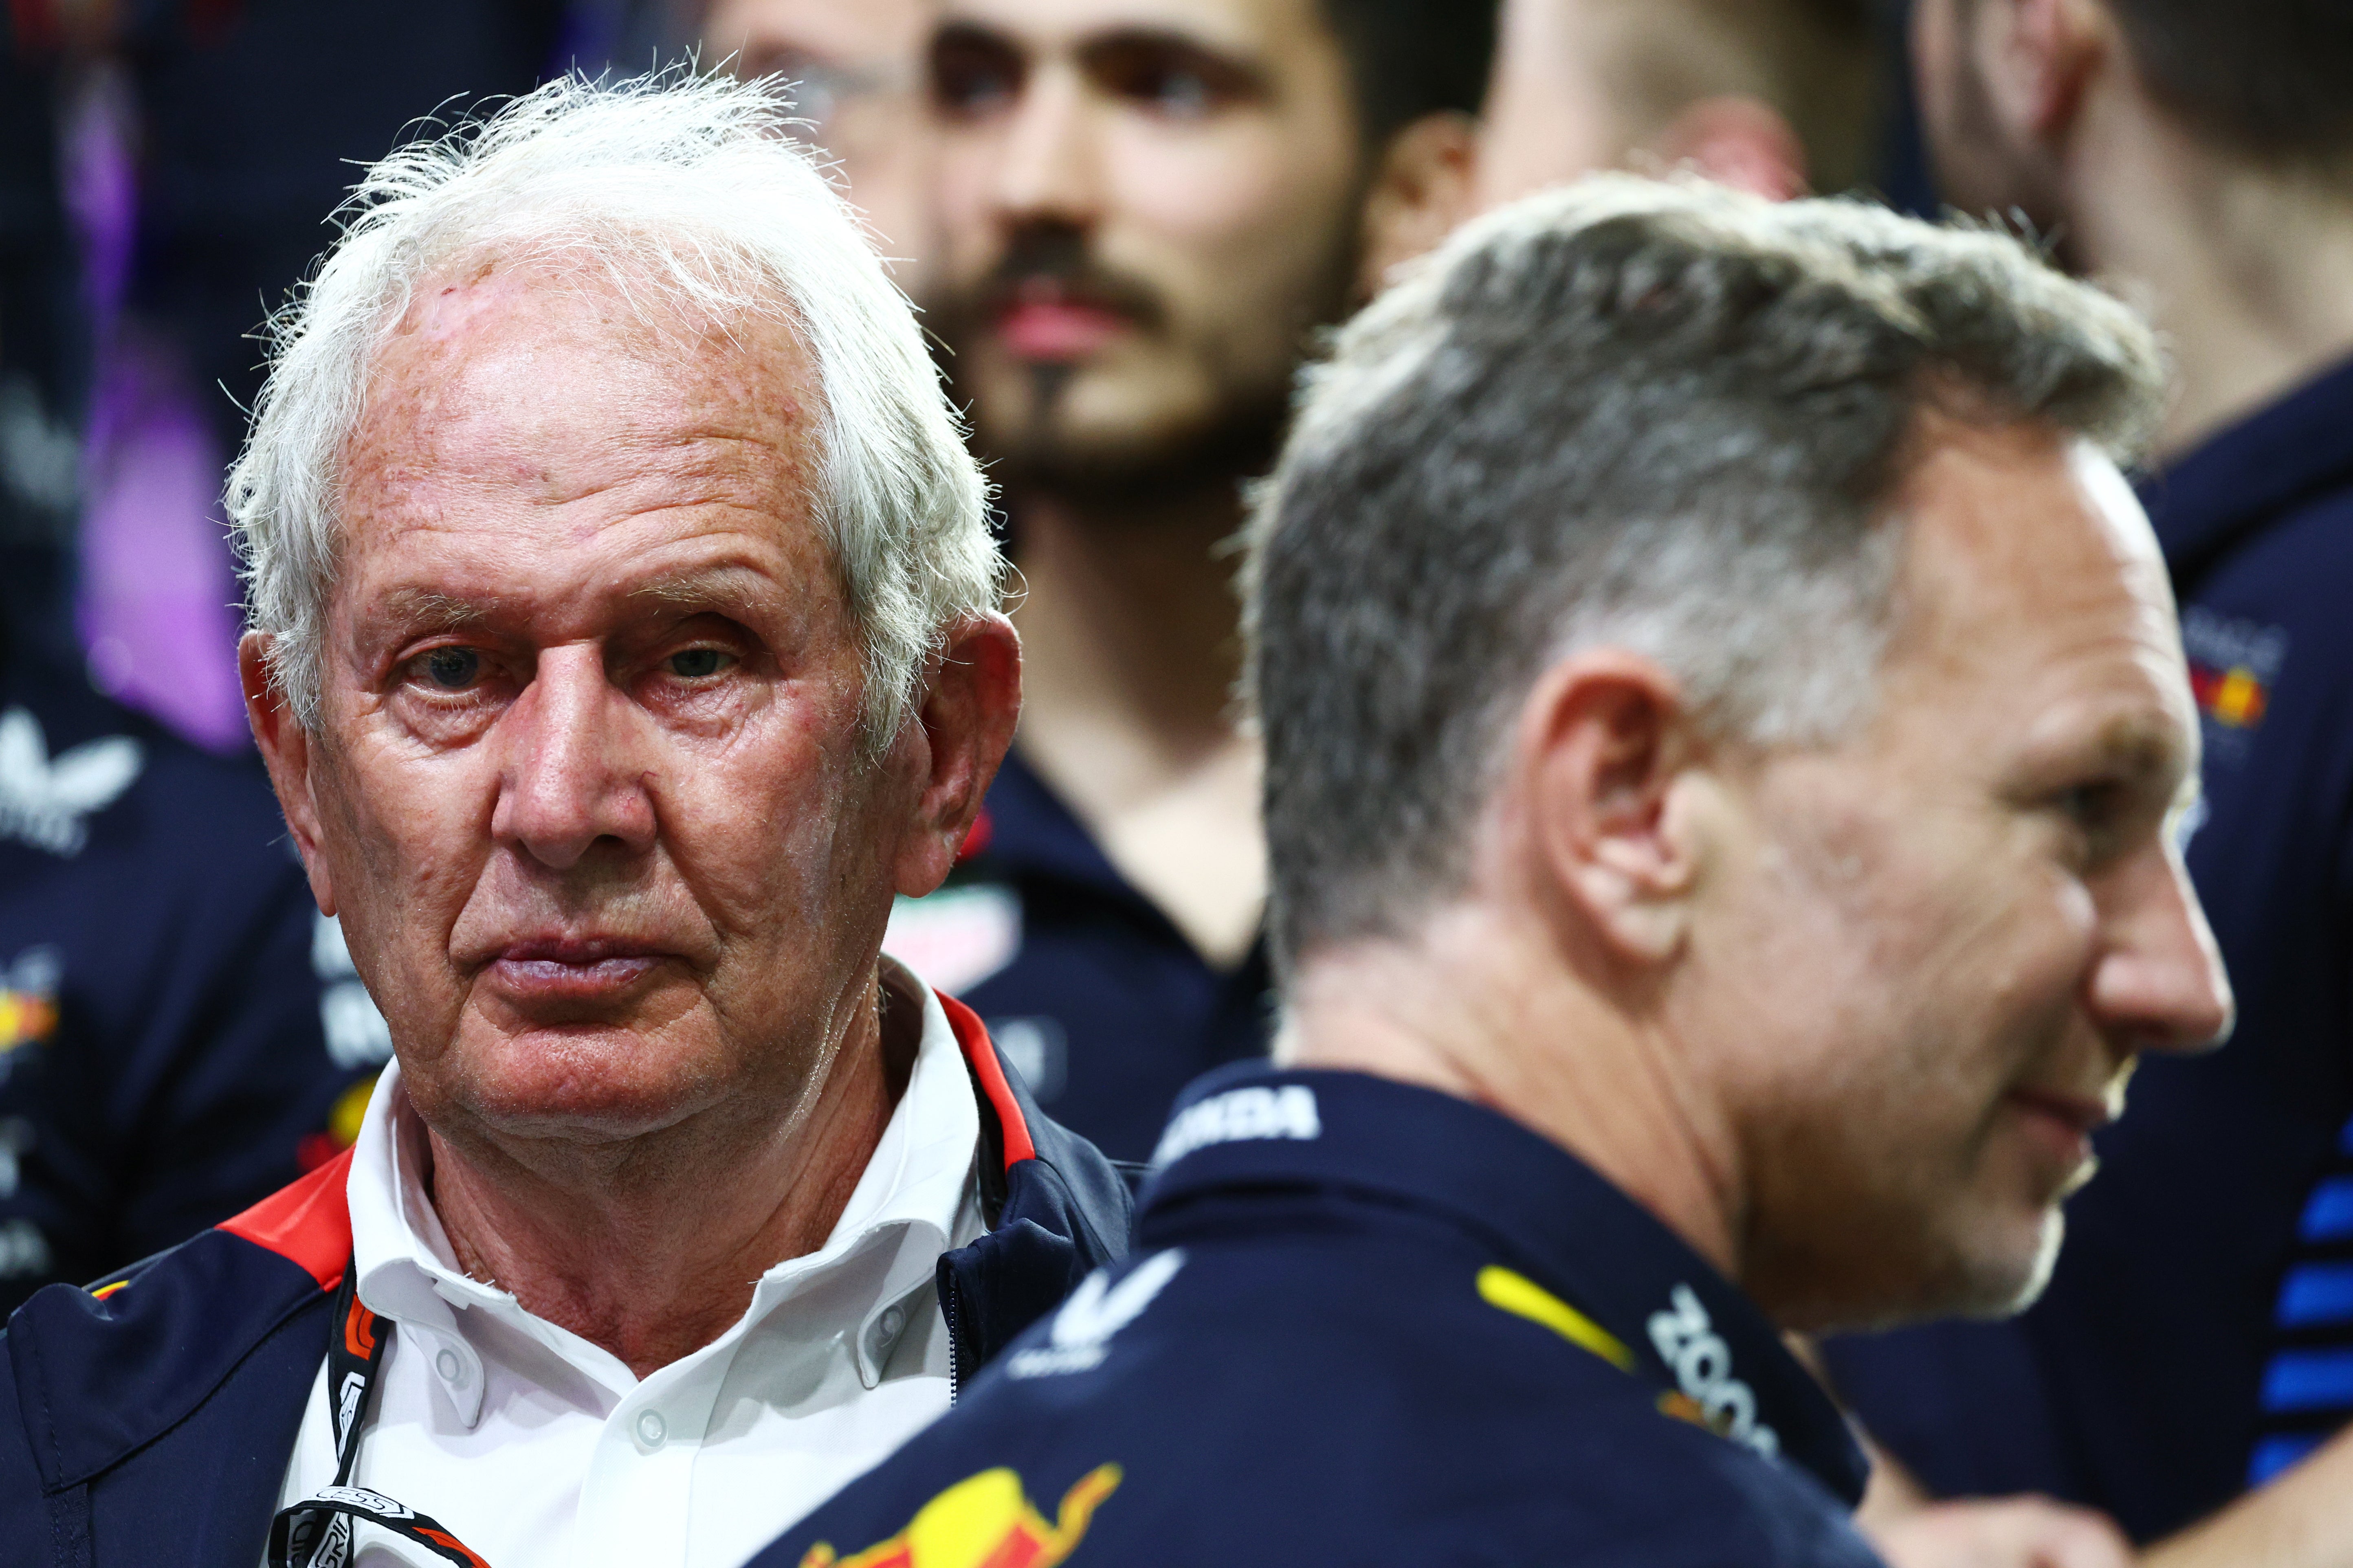 Christian Horner and major Red Bull figures such as Helmut Marko (left) have reportedly held peace talks